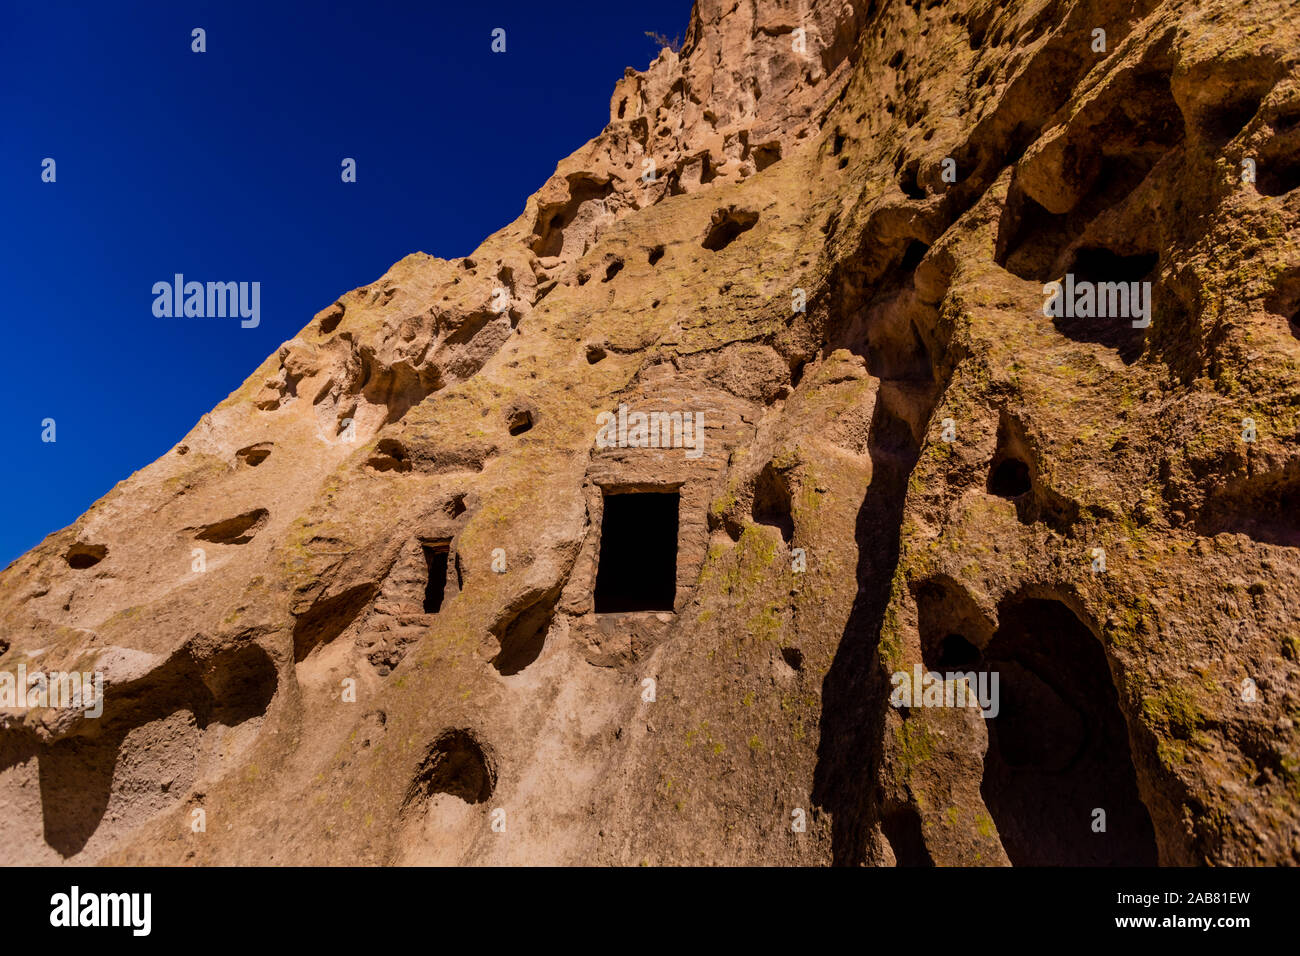 Cave dwellings on the Cliffside of Pueblo Indian Ruins in Bandelier National Monument, New Mexico, North America Stock Photo